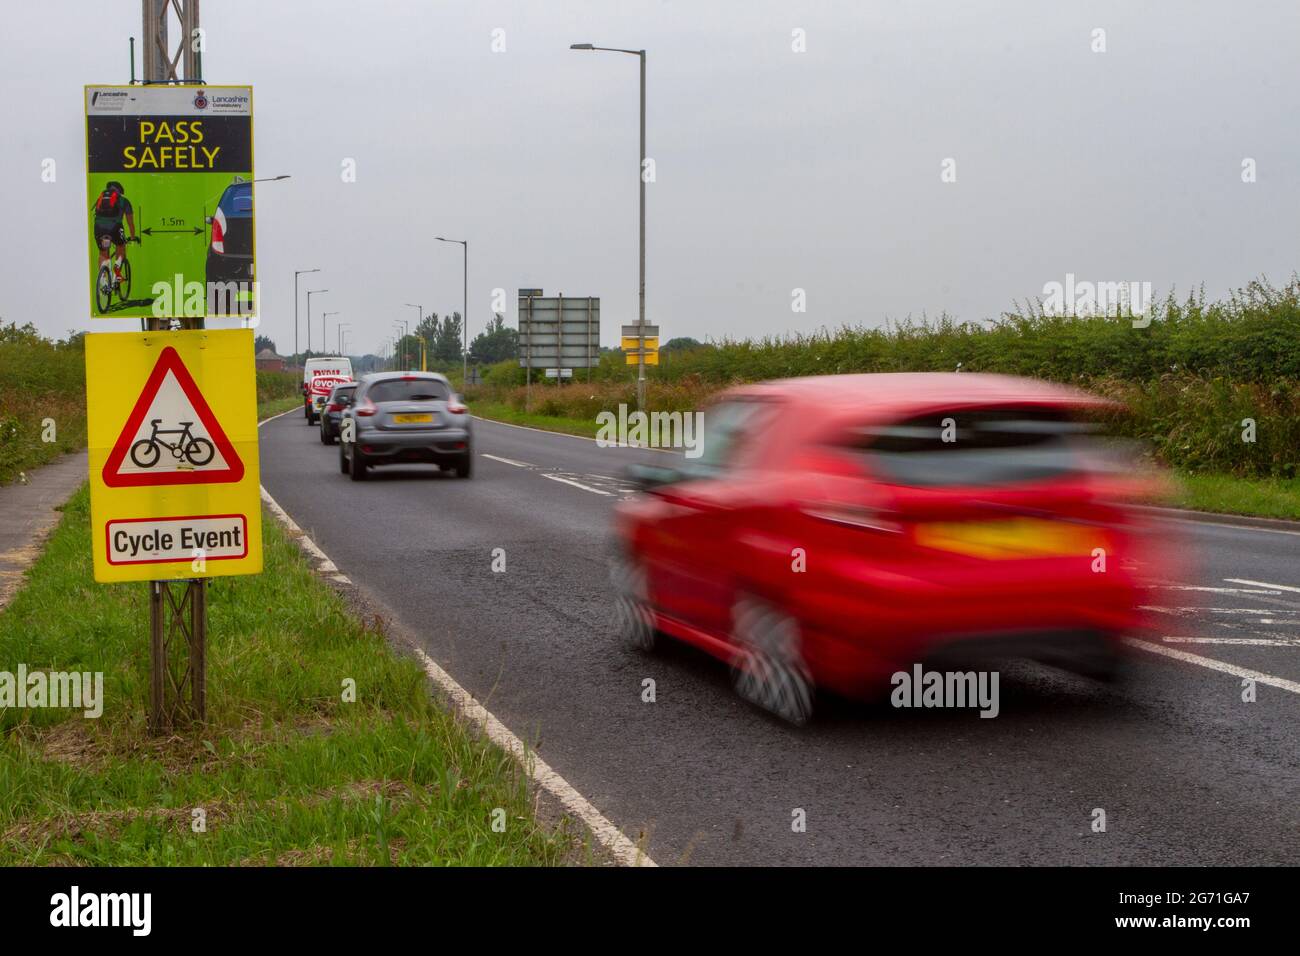 Pass Safely Sign Cycle Event, Police community road safety partnership   Roadside traffic signs in Southport, UK Stock Photo